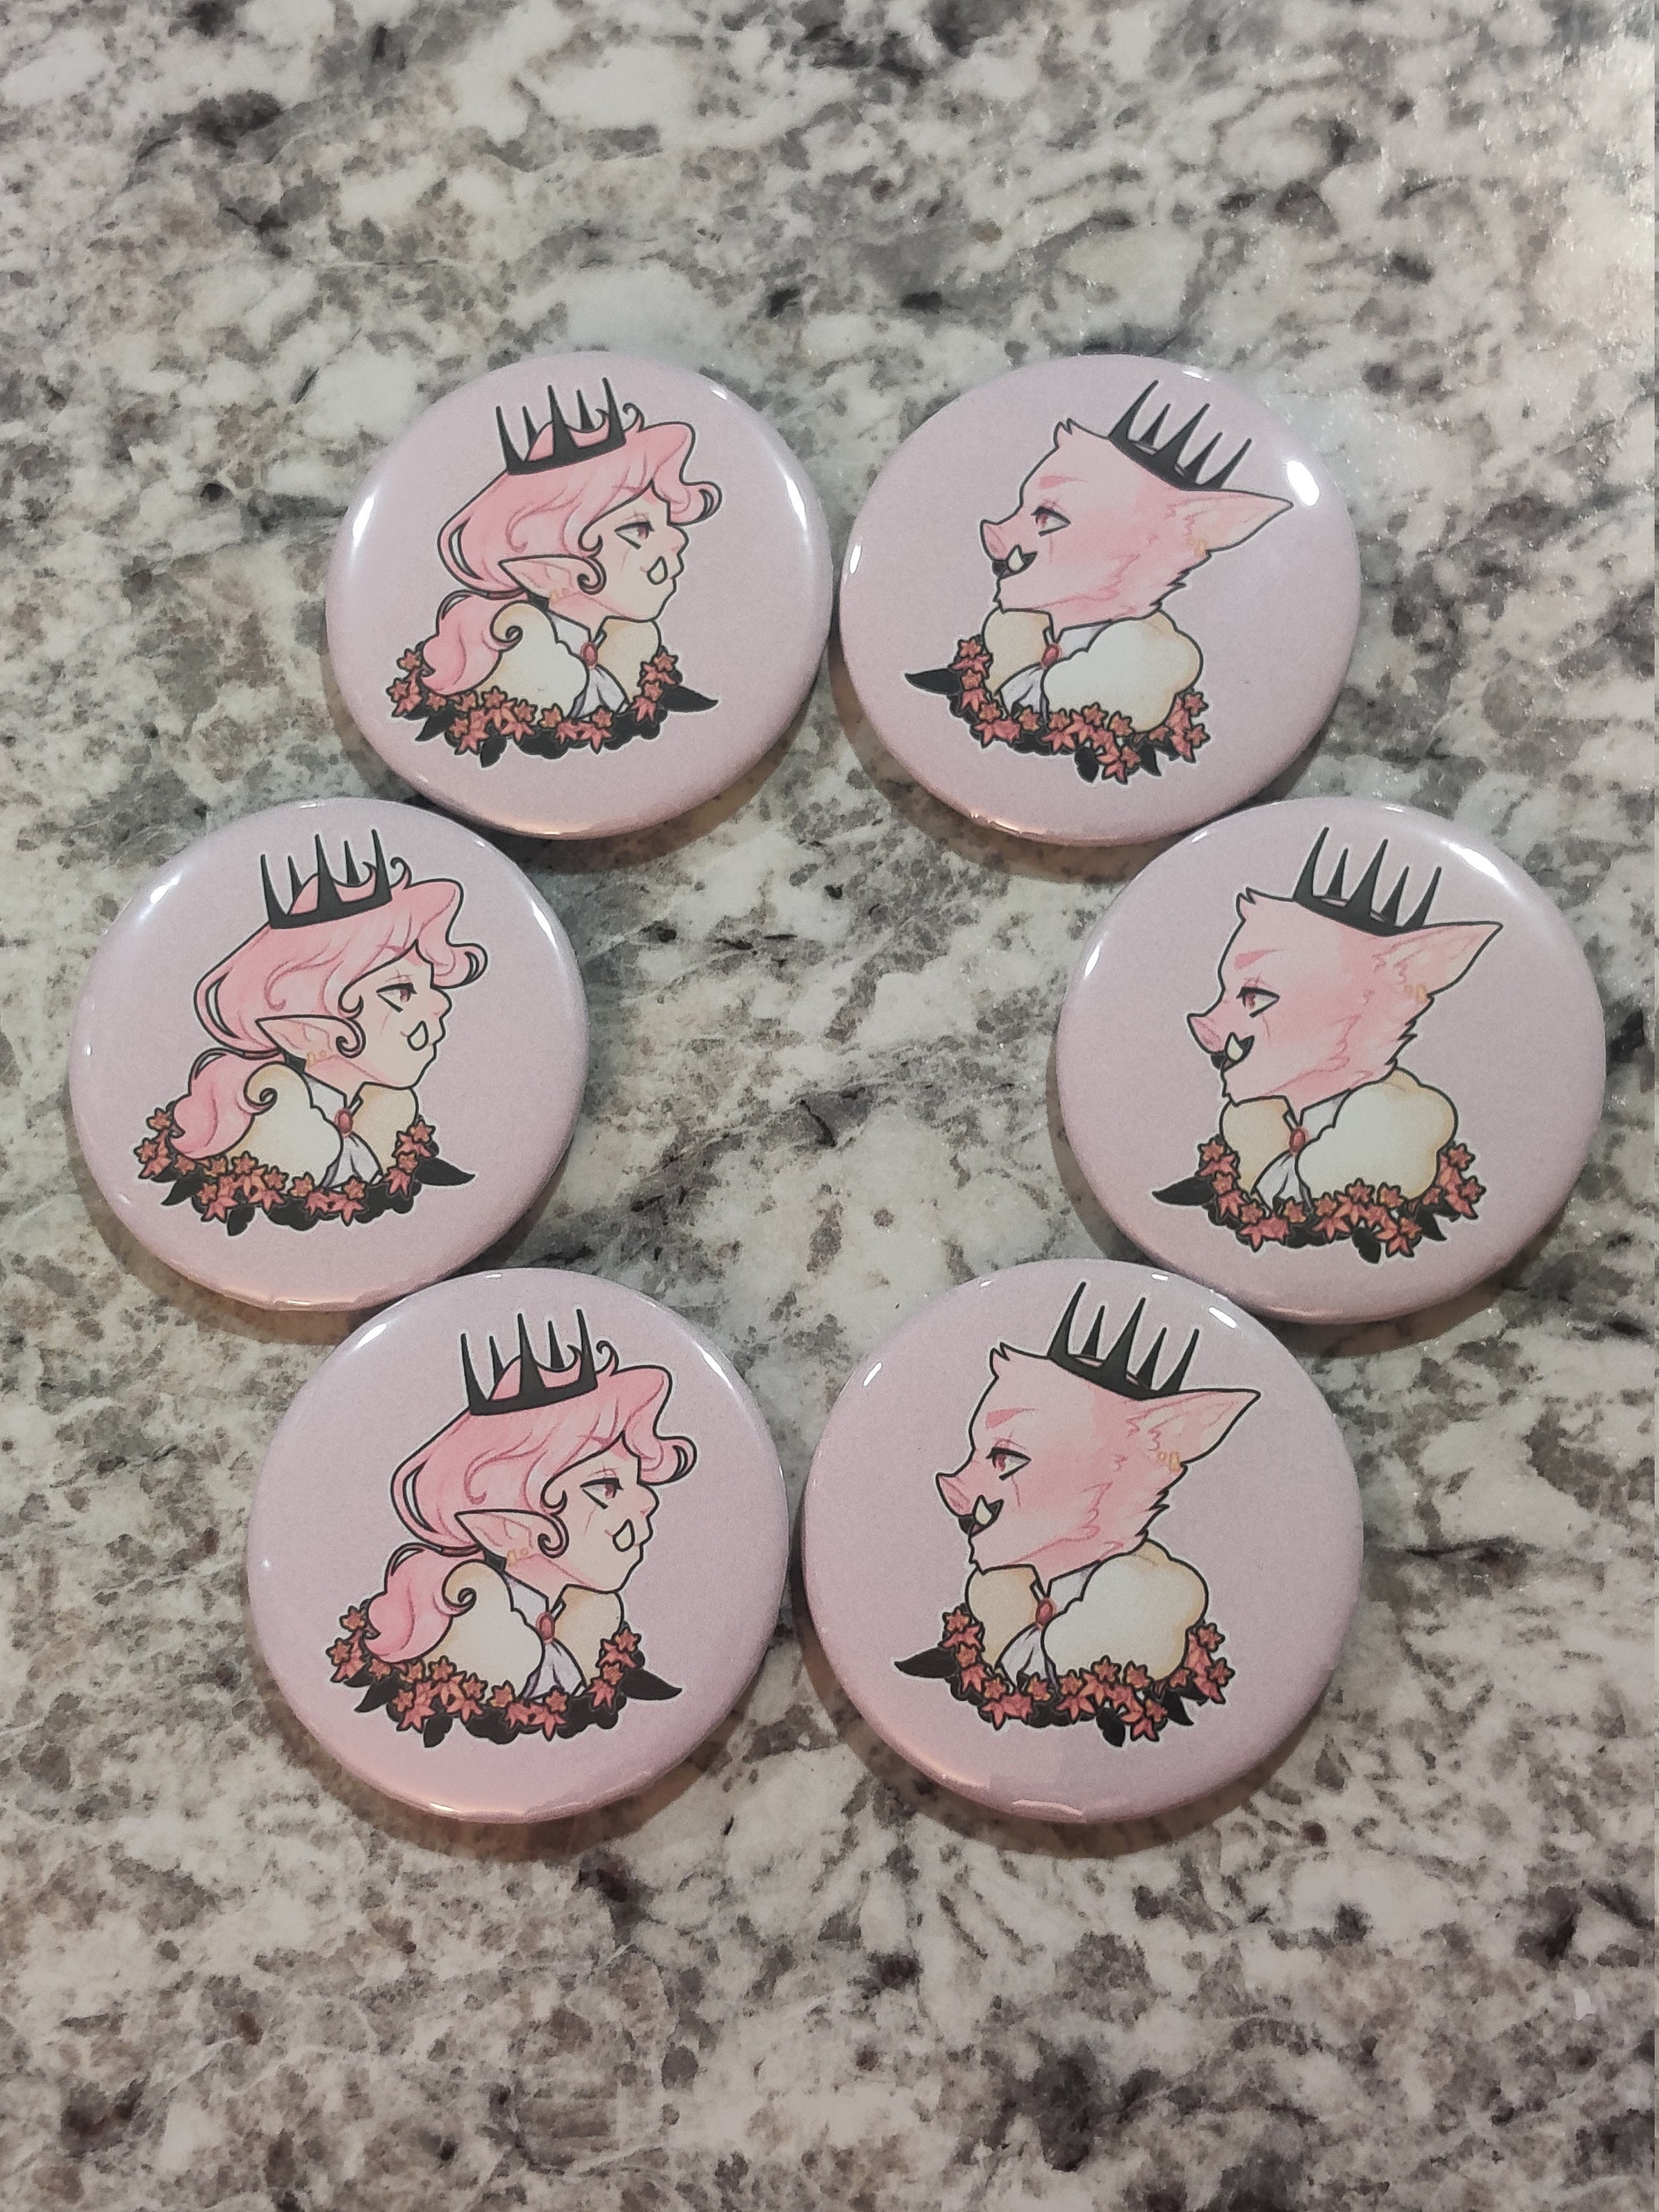 Discover Technoblade Dream Smp Inspired Pin Buttons!